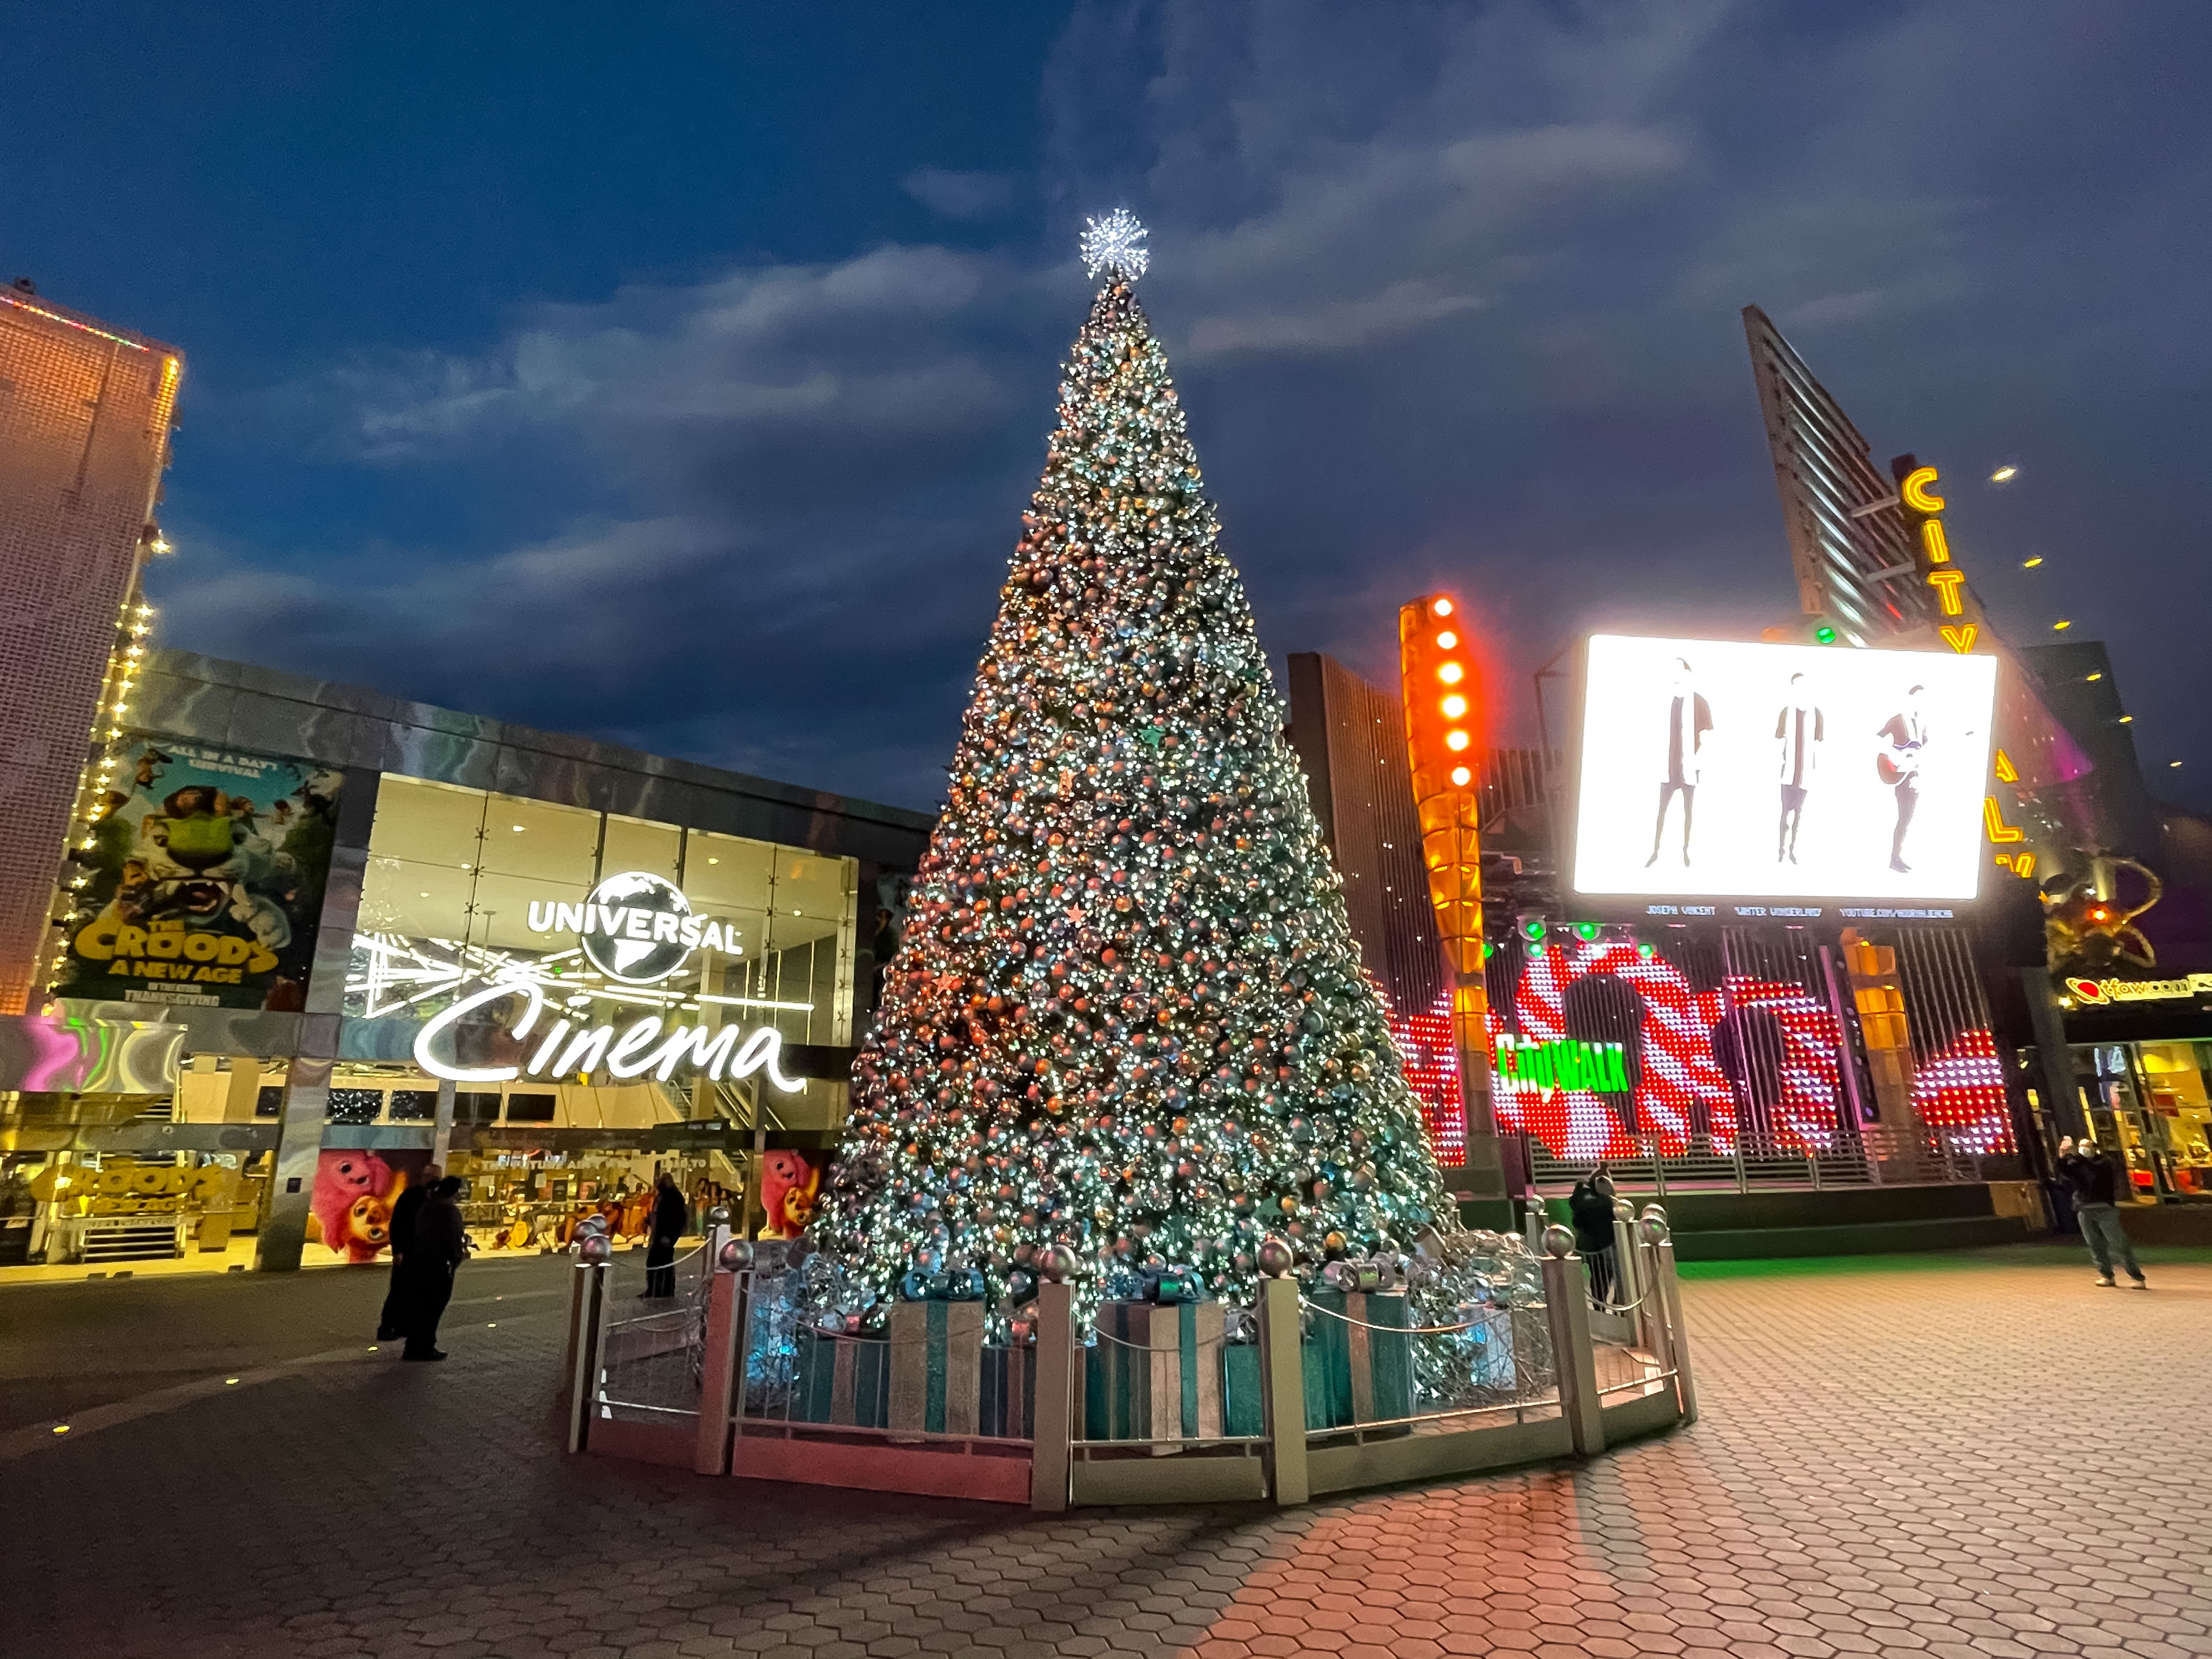 A Christmas tree at the Universal City Walk promenade in Universal City, California on December 24, 2020 | Source: Getty Images